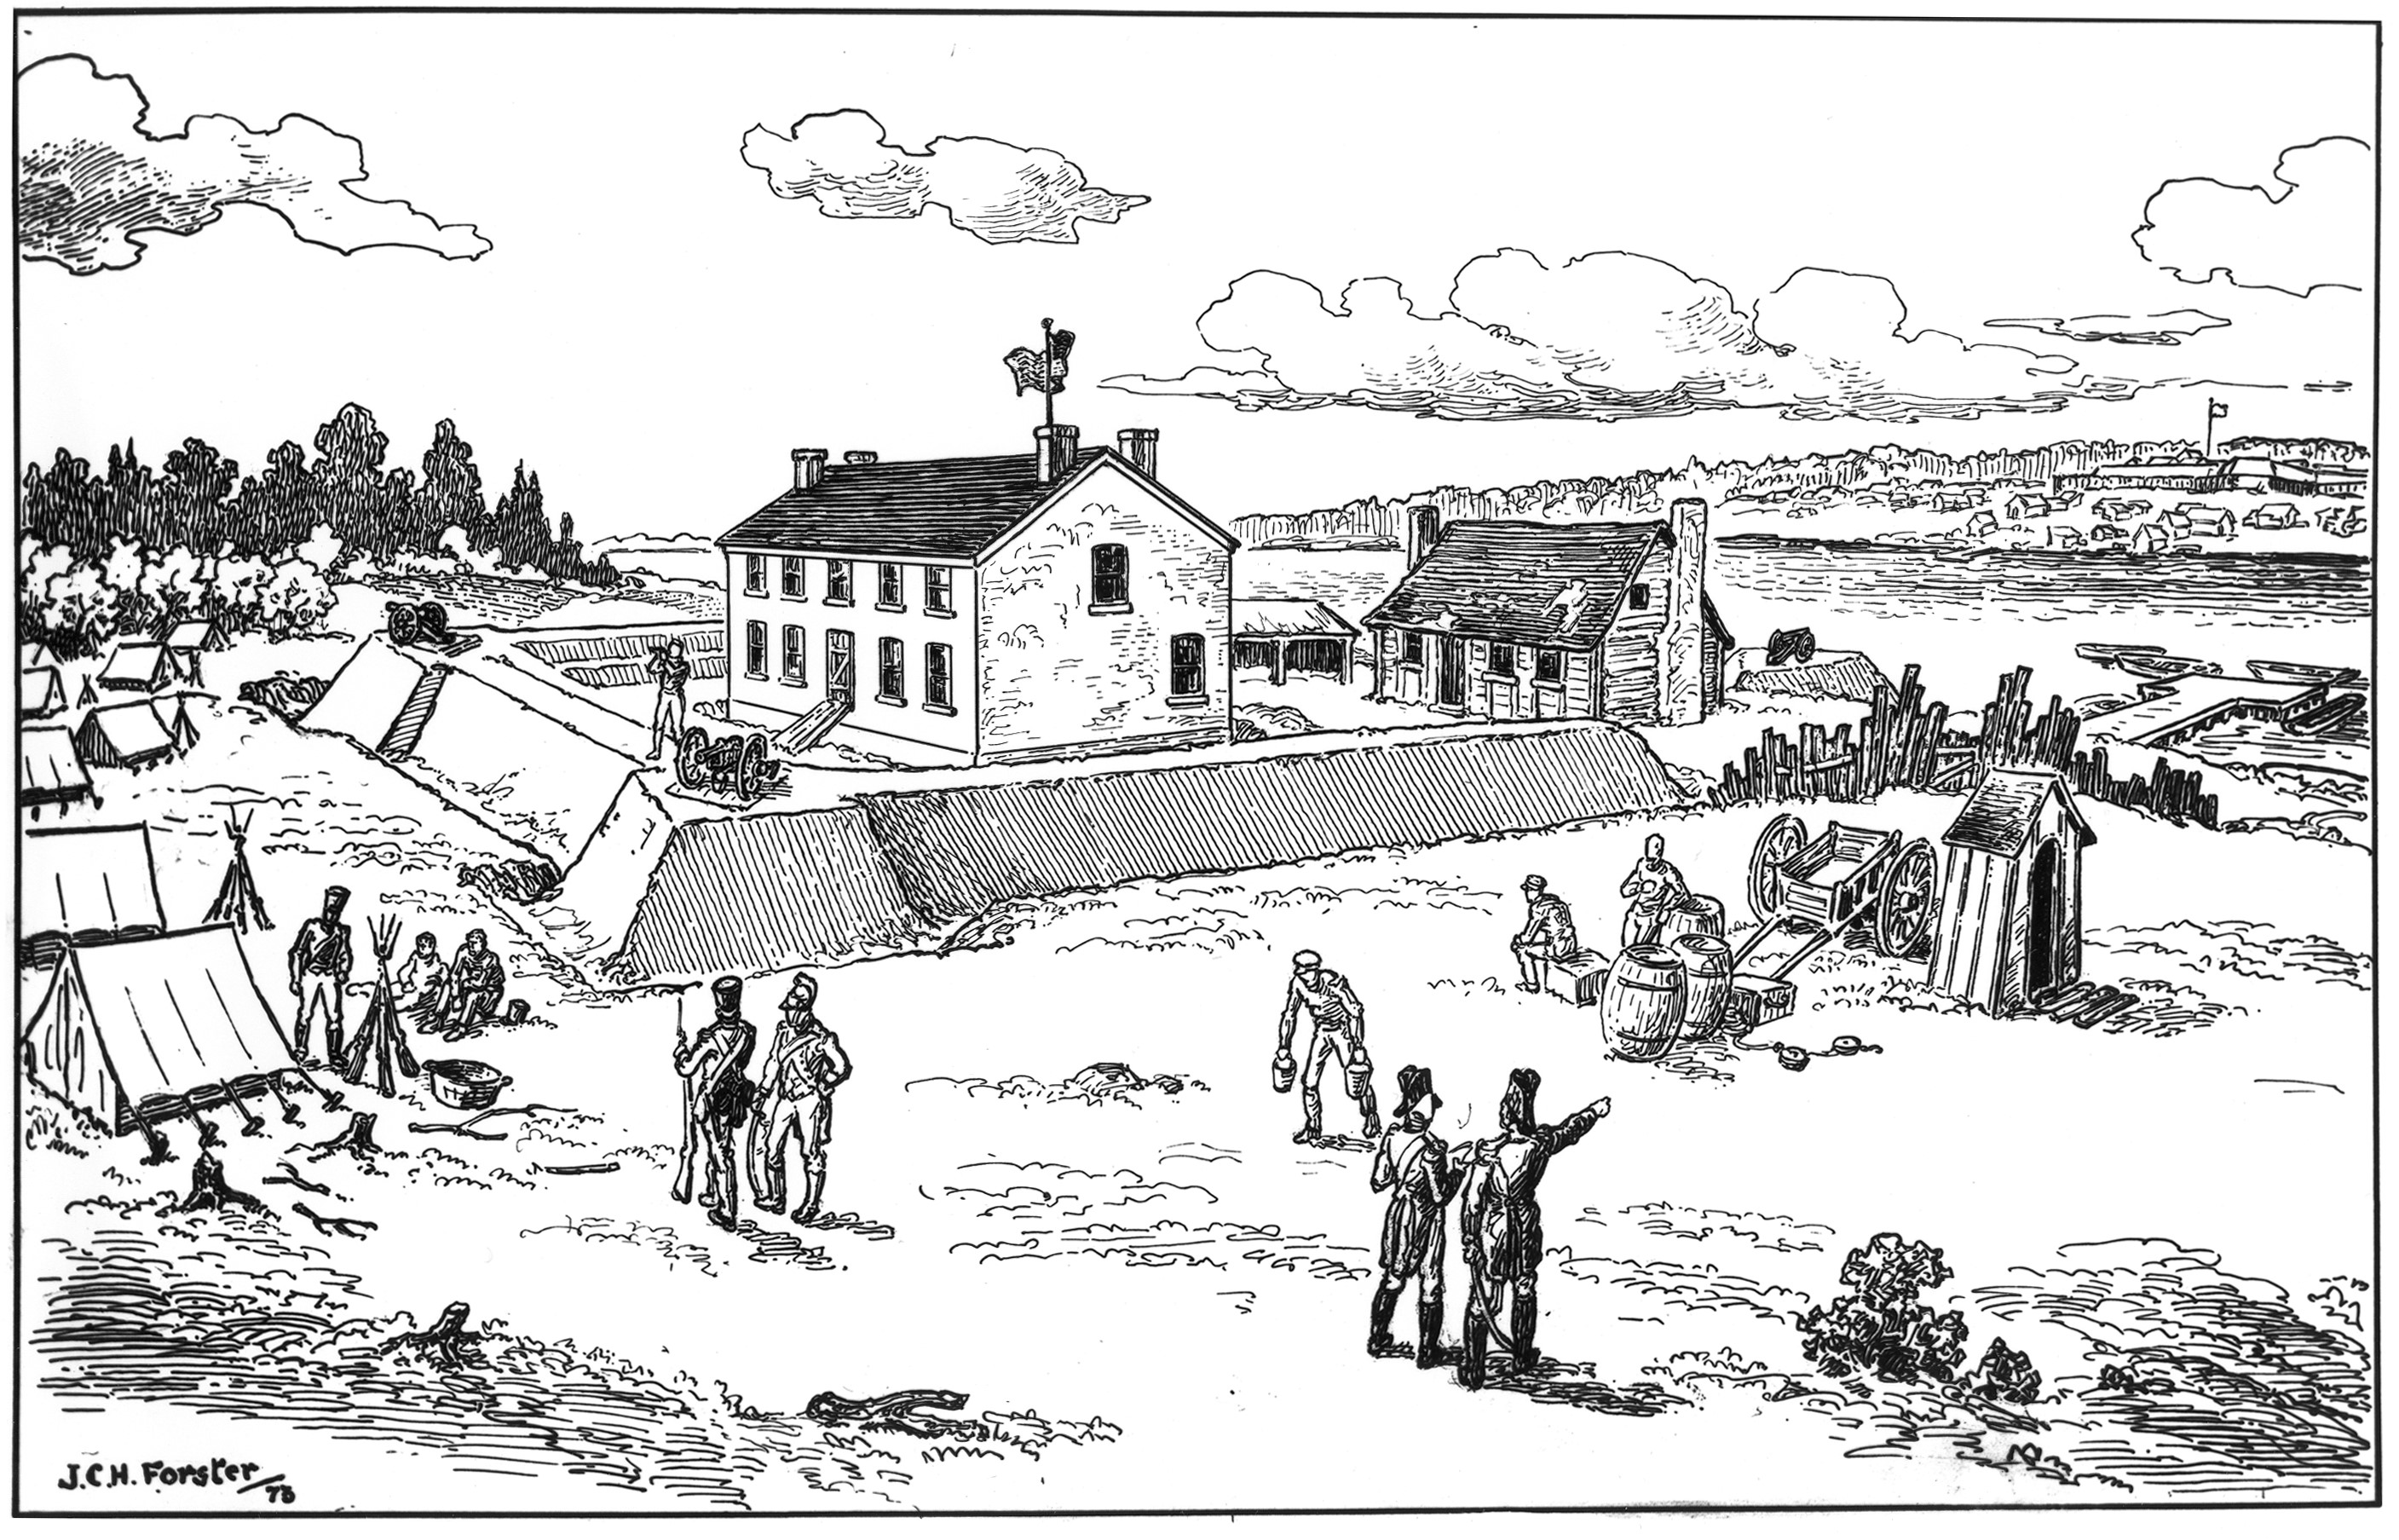 Home of François Baby in Sandwich, also known Port Hope, was the headquarters of U.S. Brigadier General Hull in summer 1812.  Painting by J.C.H. Forster courtesy of Windsor's Community Museum, P5388.